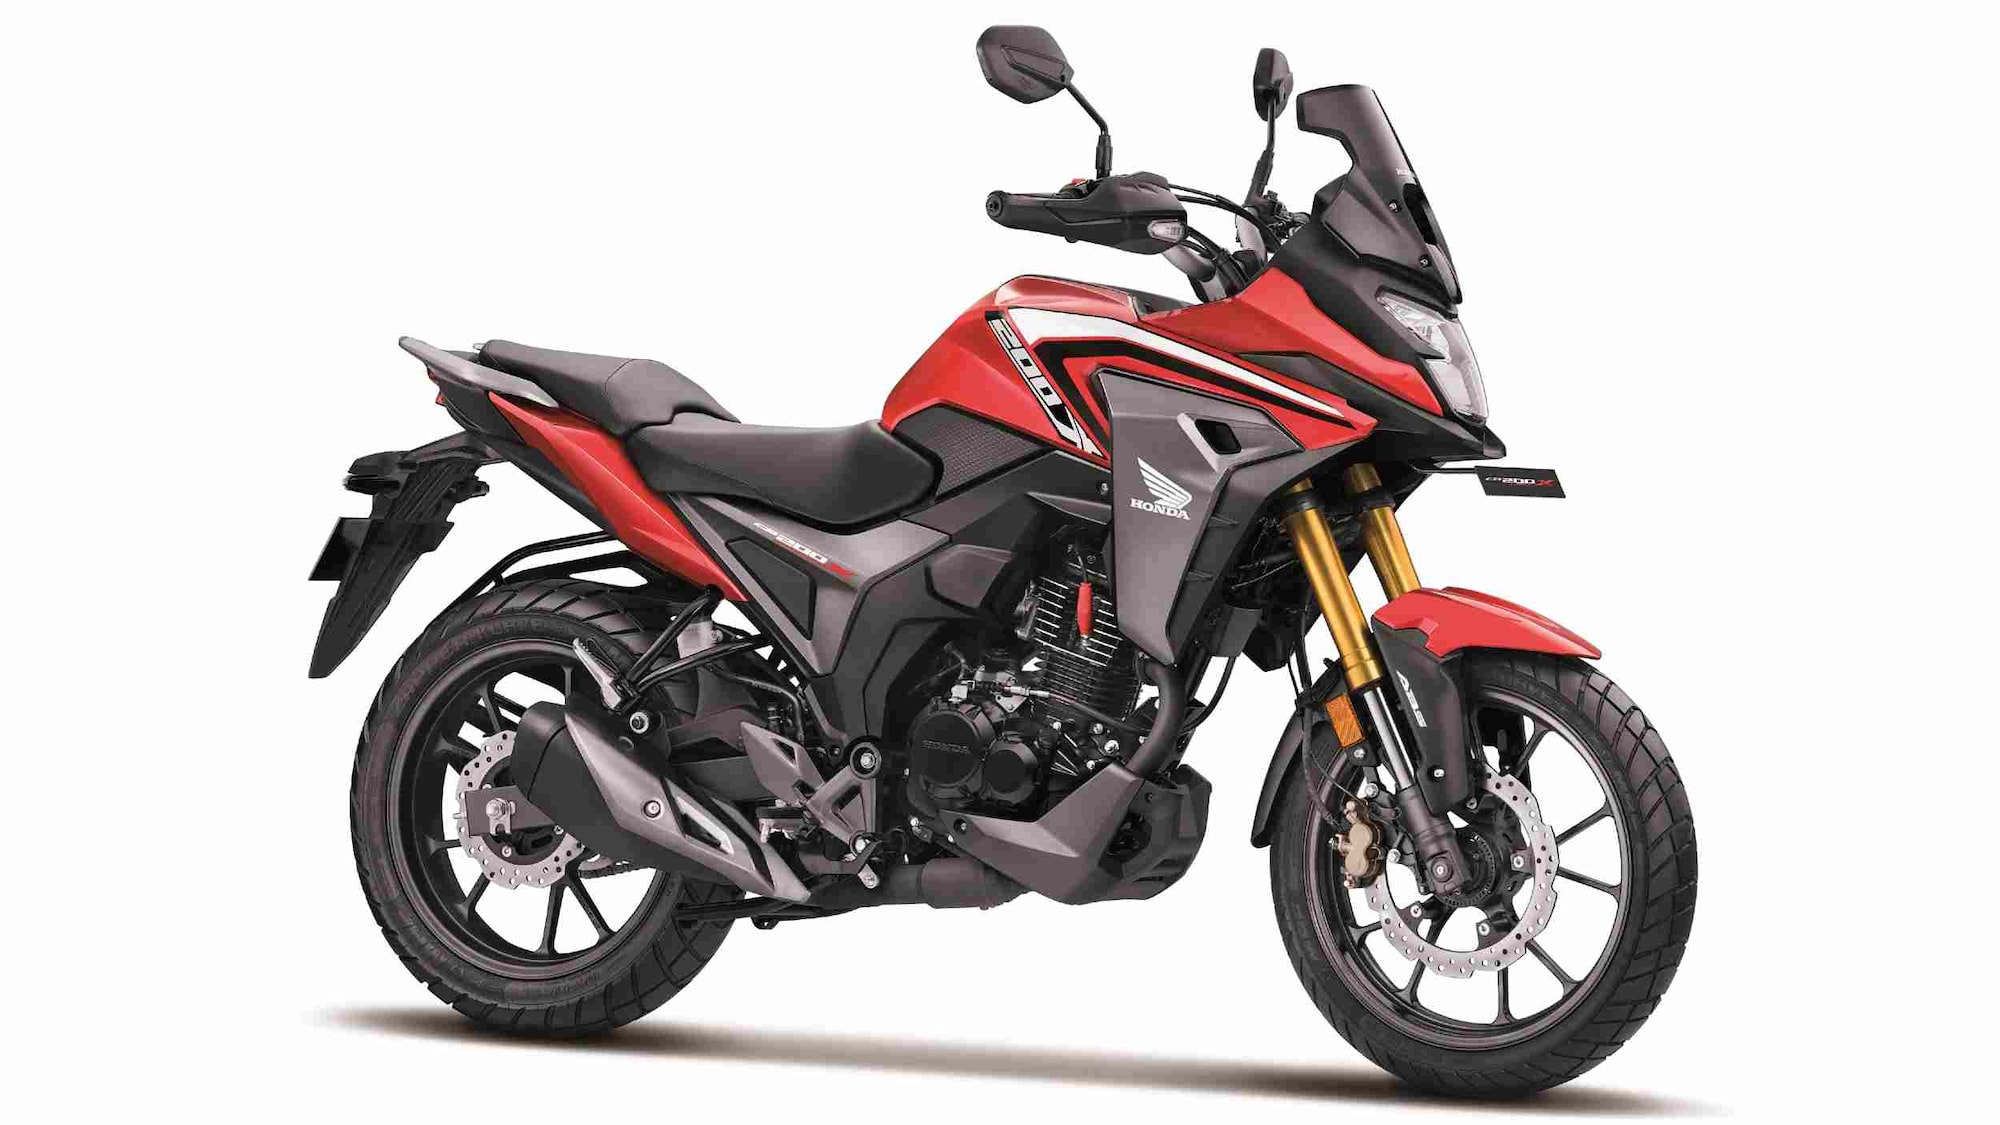 The Honda CB200X will be available in three shades - red, silver and black. Image: Honda